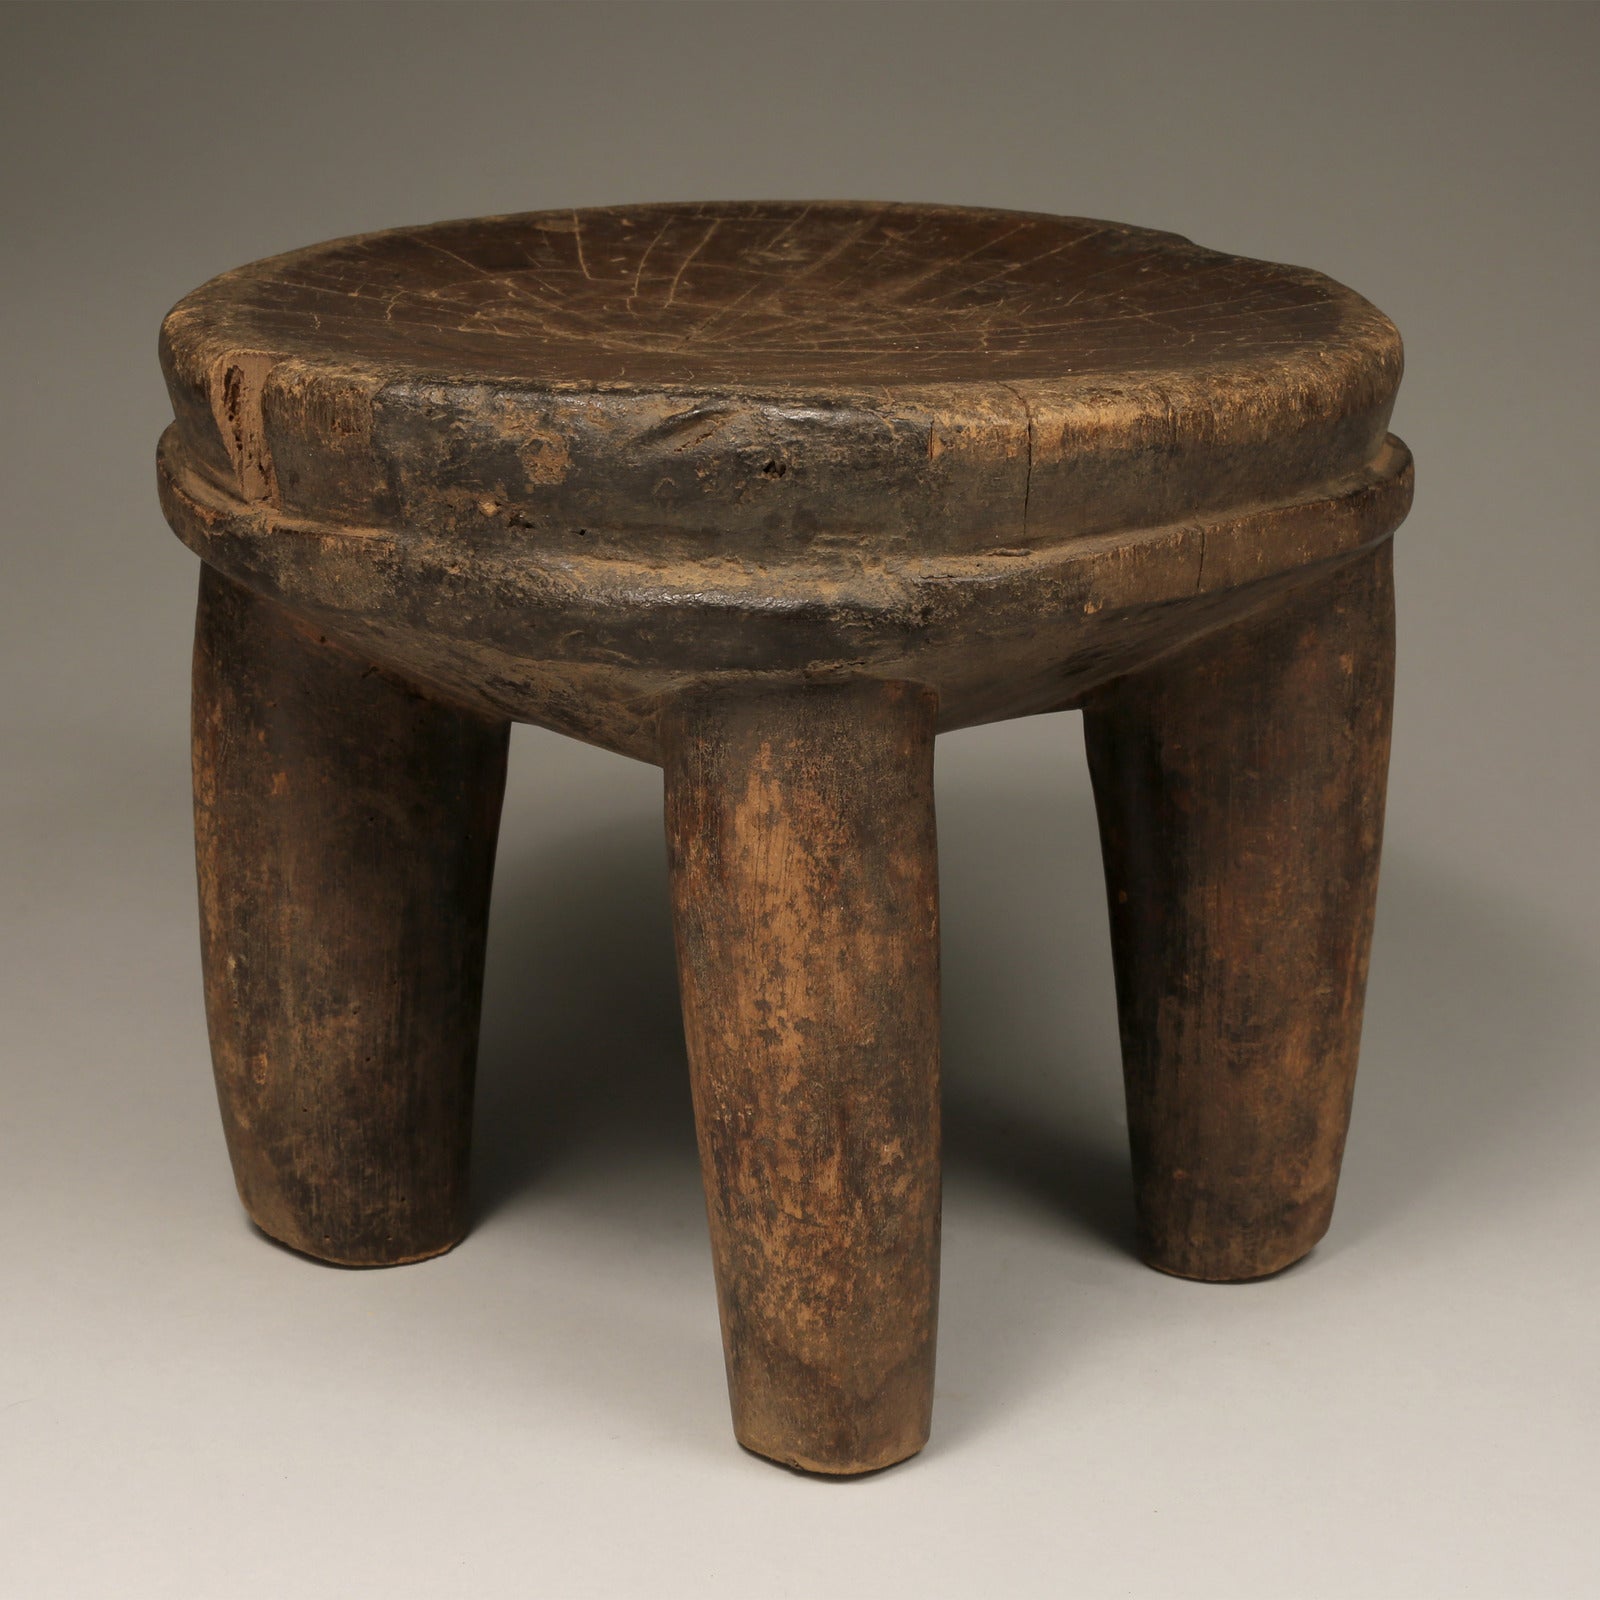 Tribal Furniture - African Art - Home Decor - African Stools - Chairs - Traditional Furniture - Collectible Art - This African Senufo Stool is a handcrafted piece of furniture made from natural wood. Its unique design united with its sturdiness makes it ideal for daily use and long-lasting enjoyment. Perfect for any home or office. Height: 8